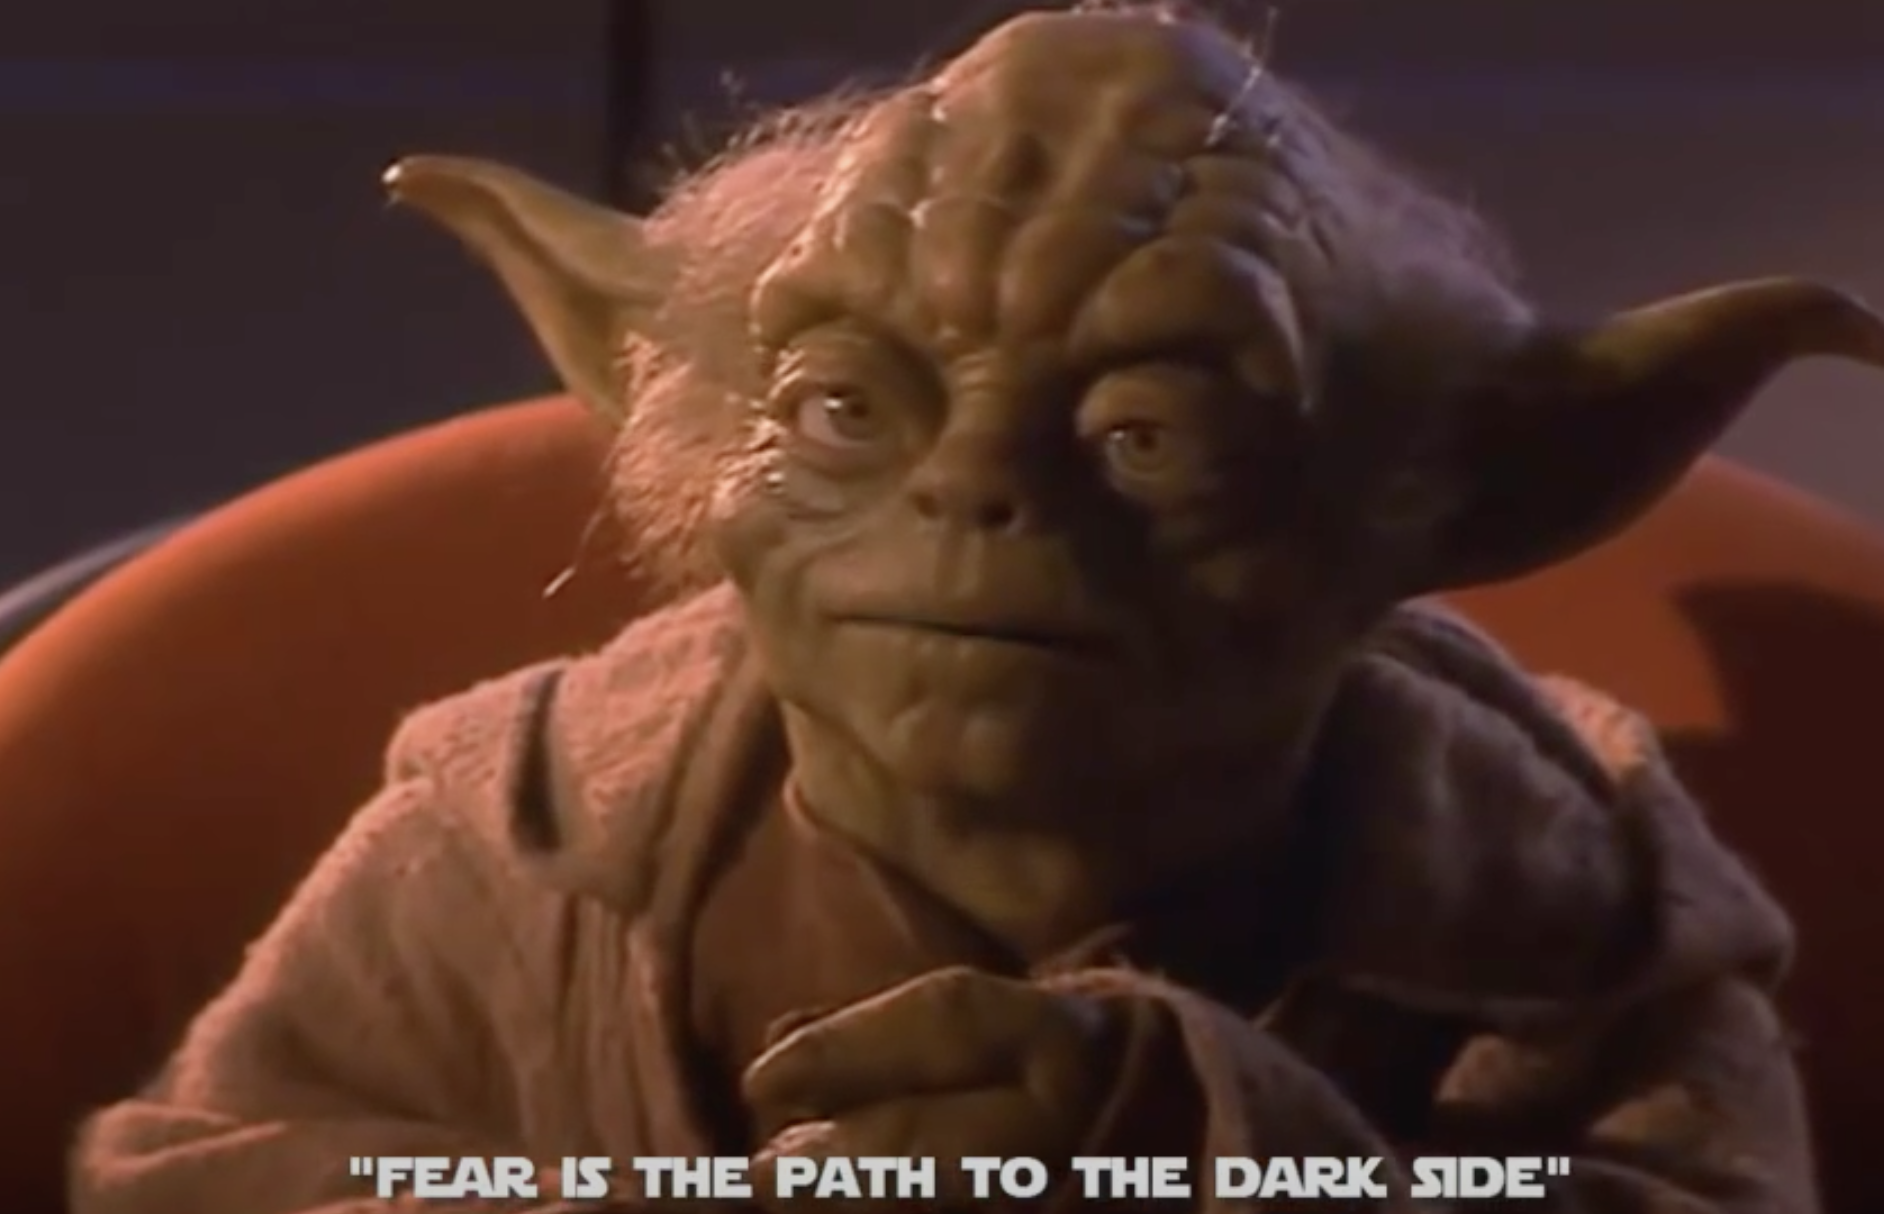 One Quote from “Star Wars” that Perfectly Explains the Connection between  Fear & Anger. | elephant journal